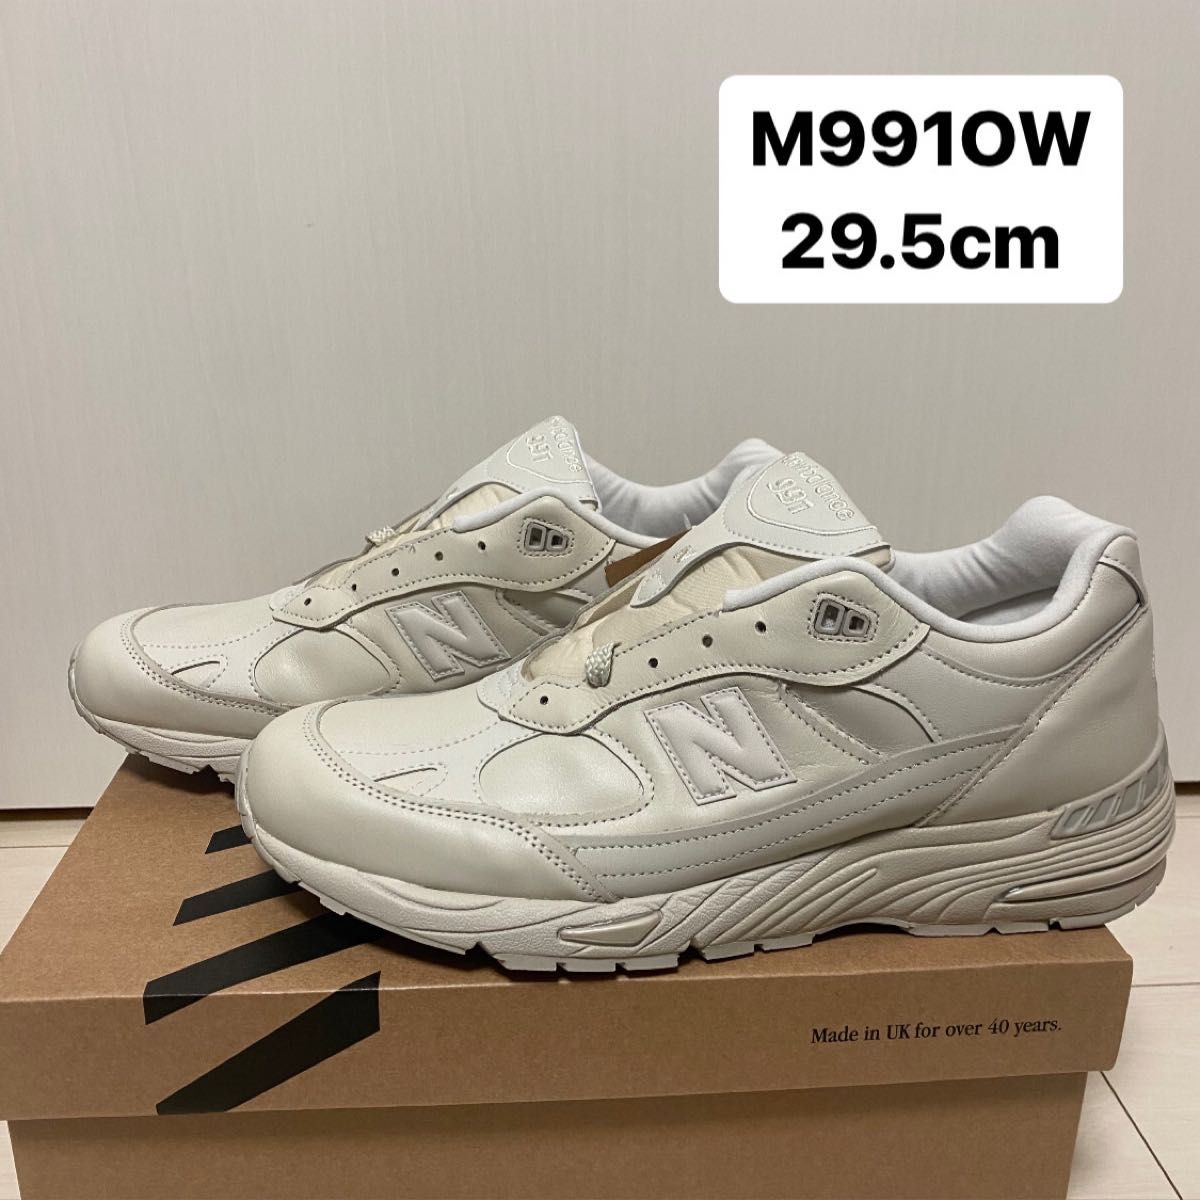 made in UK NEW BALANCE 991 M991OW 29.5cm